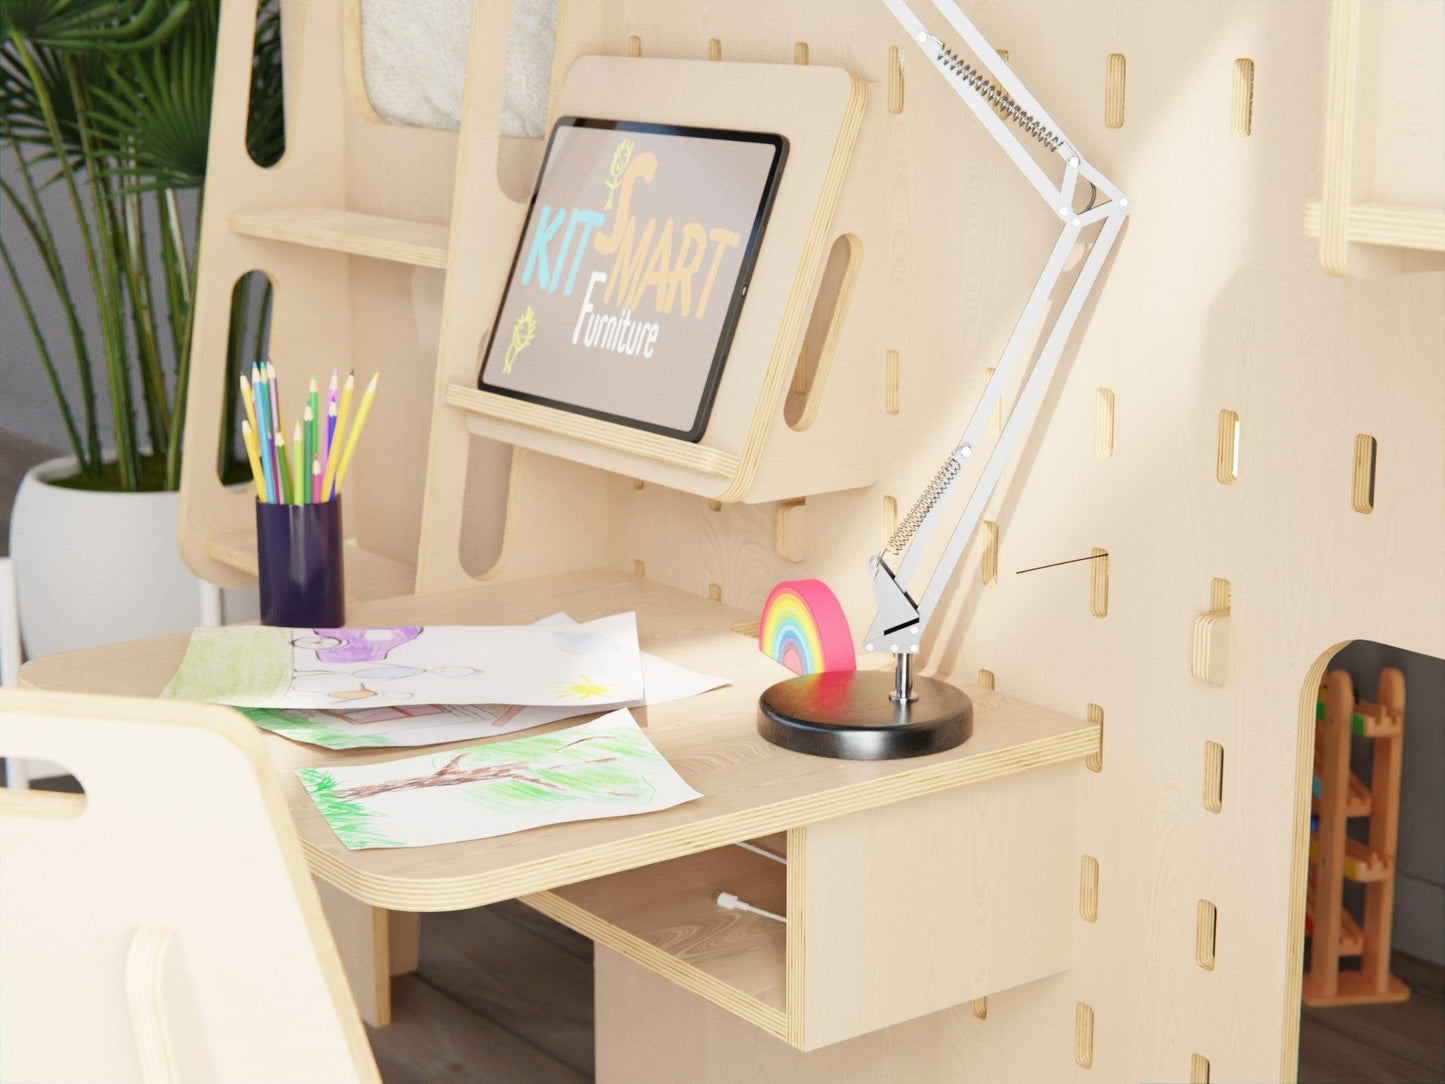 Space-saving kids' loft bed in plywood with study area.